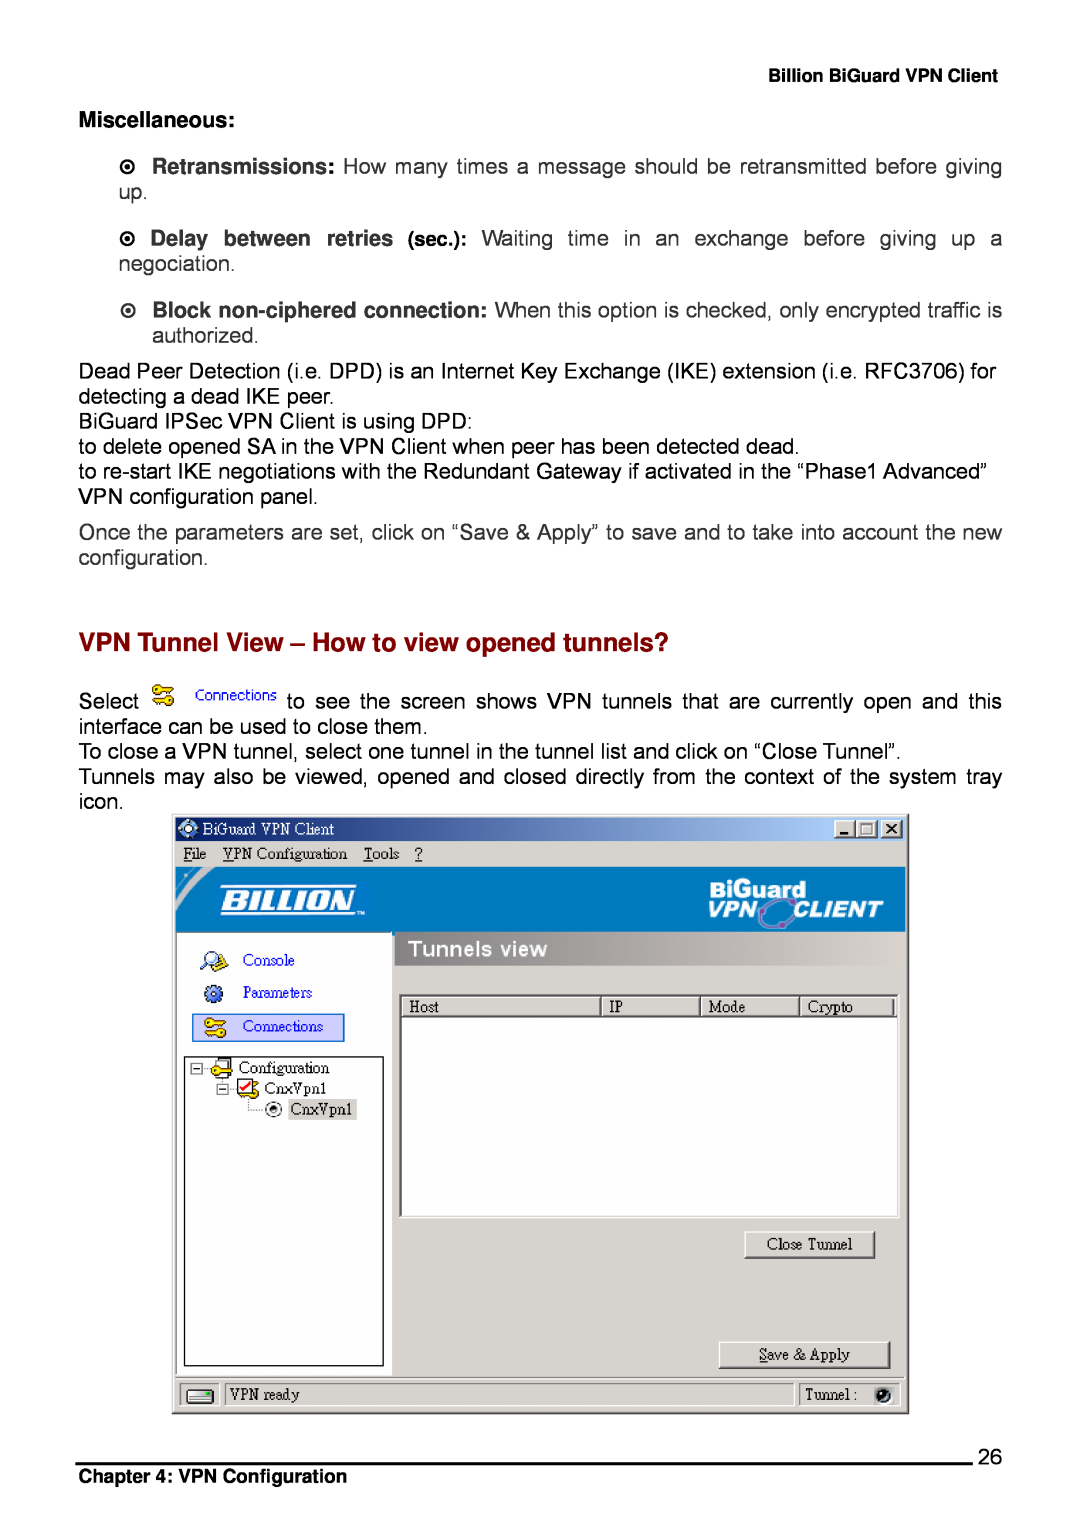 Billion Electric Company CO1 user manual VPN Tunnel View - How to view opened tunnels?, Miscellaneous 